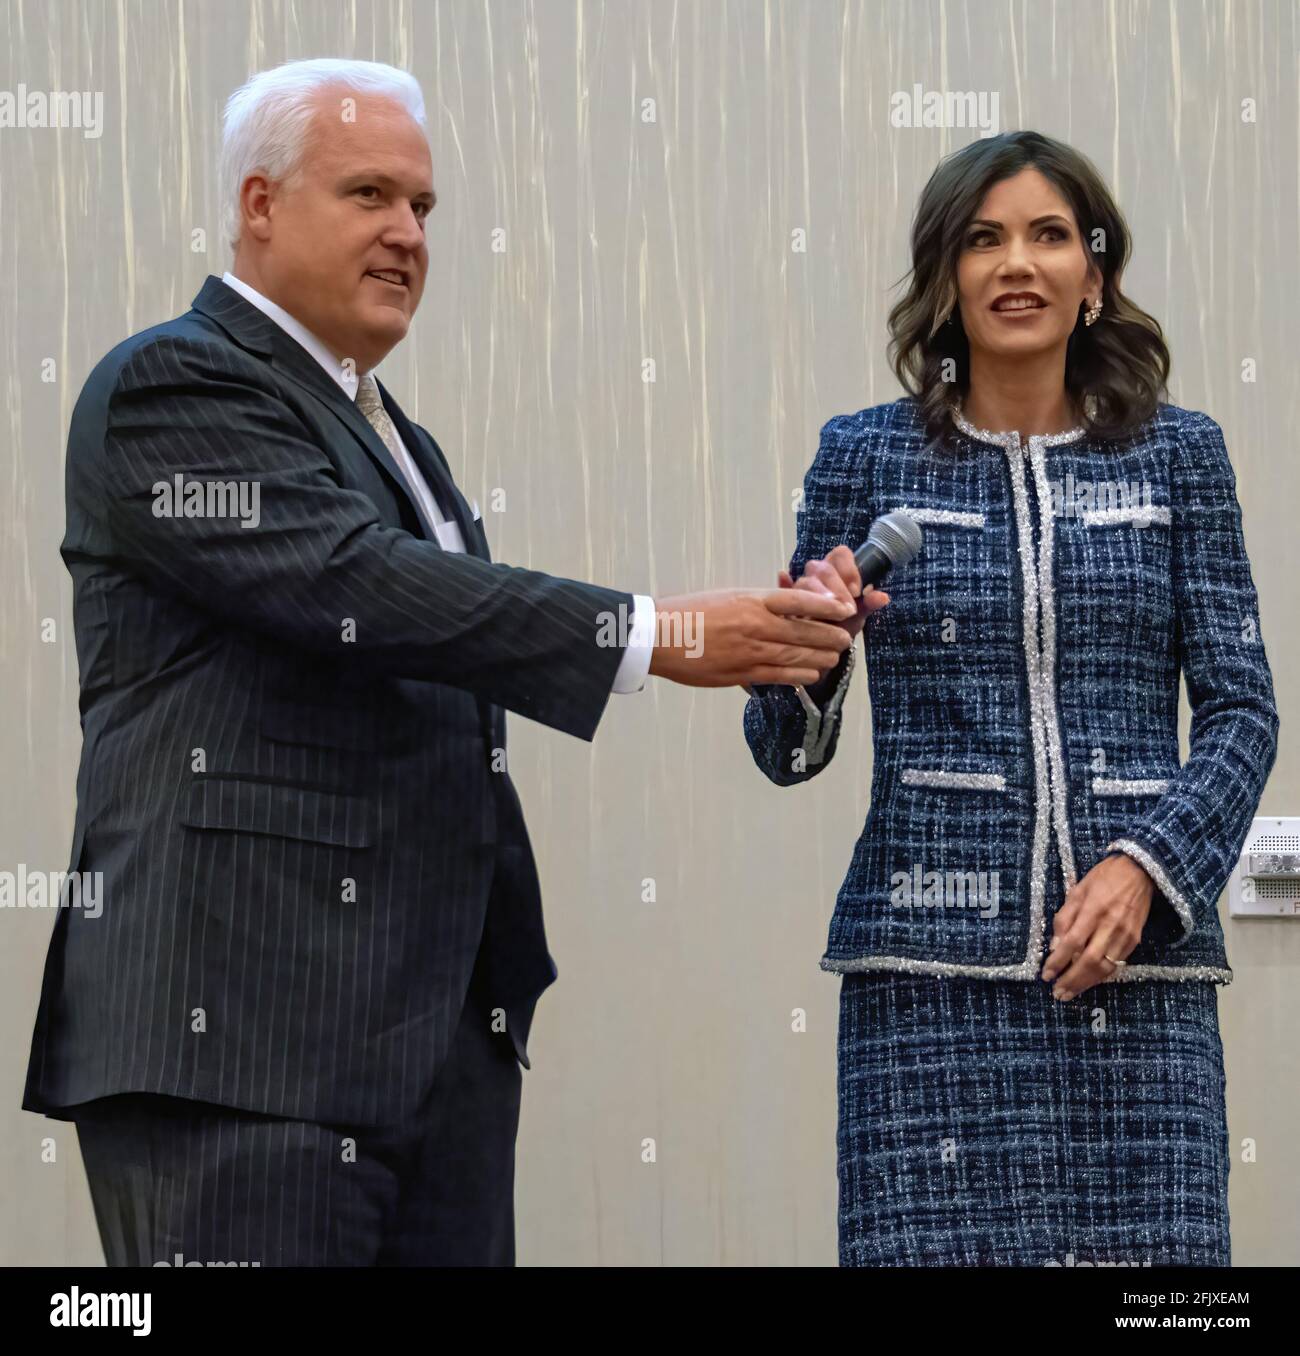 Matt Schlapp the chairman of the American conservative union introduces South Dakota Governor Kristi Noem at the annual Kansas State Republican Convention Stock Photo